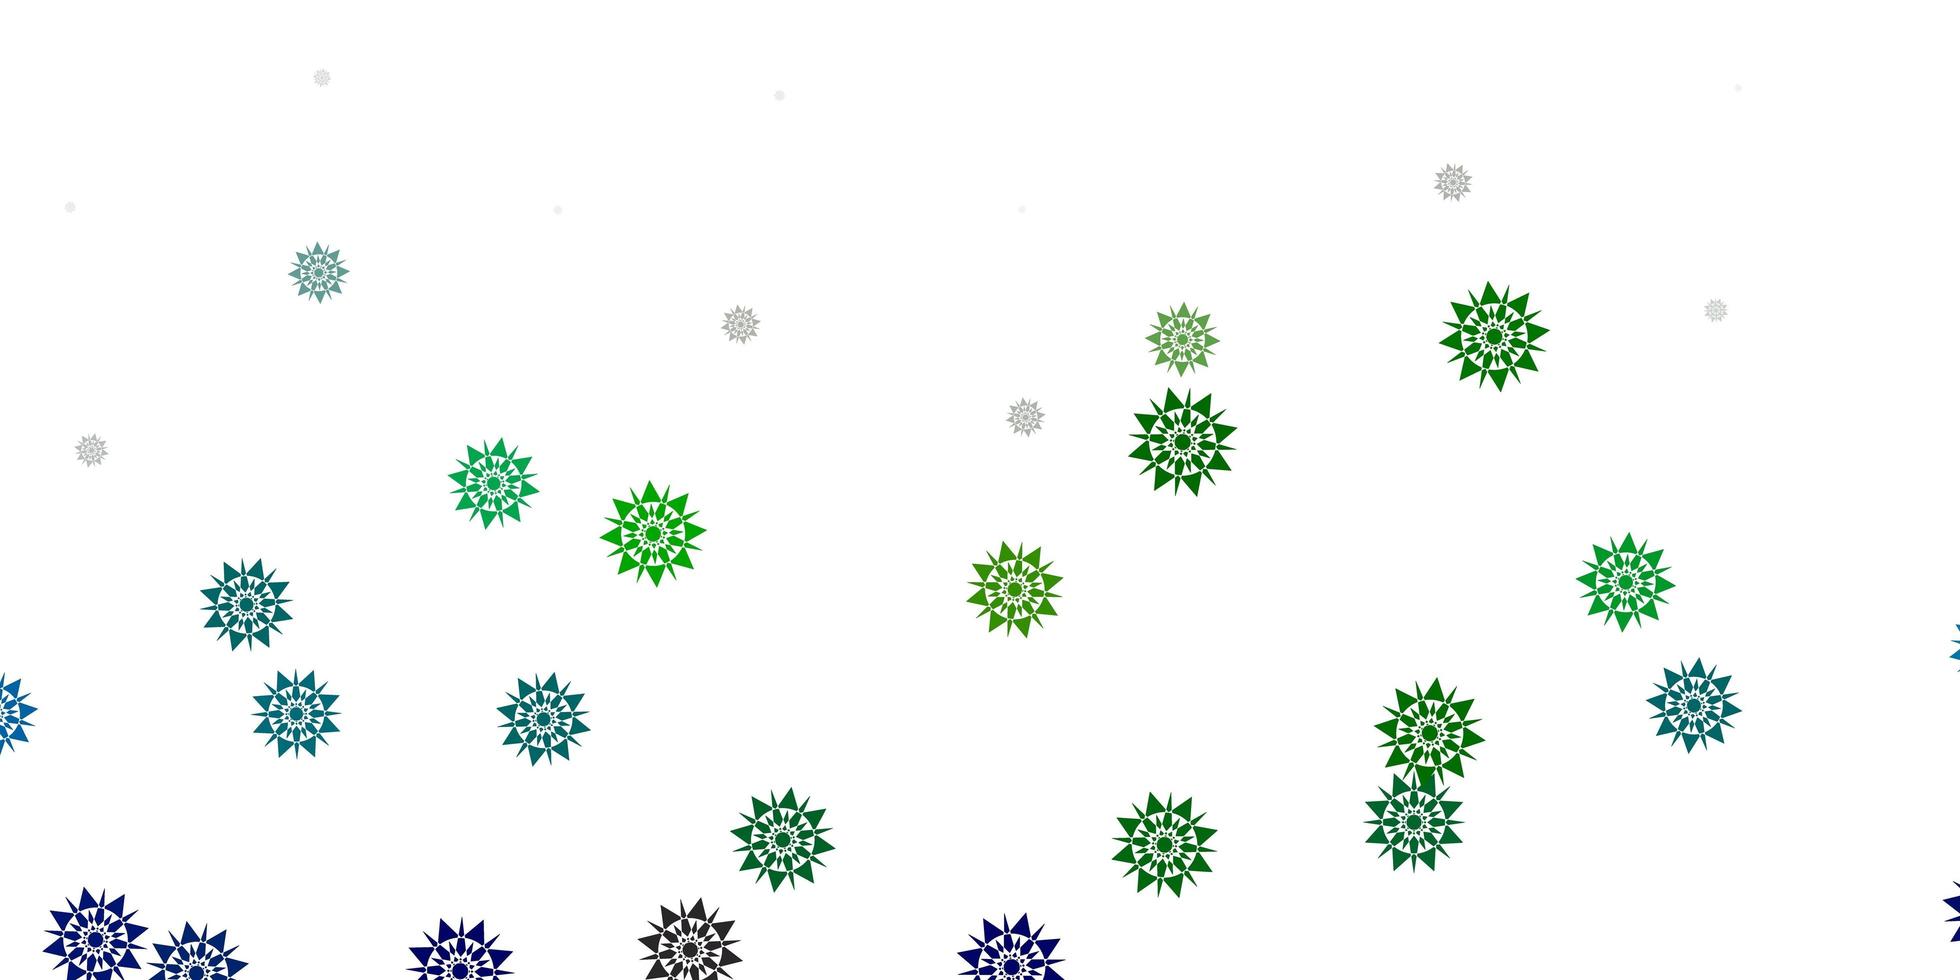 Light green vector beautiful snowflakes backdrop with flowers.